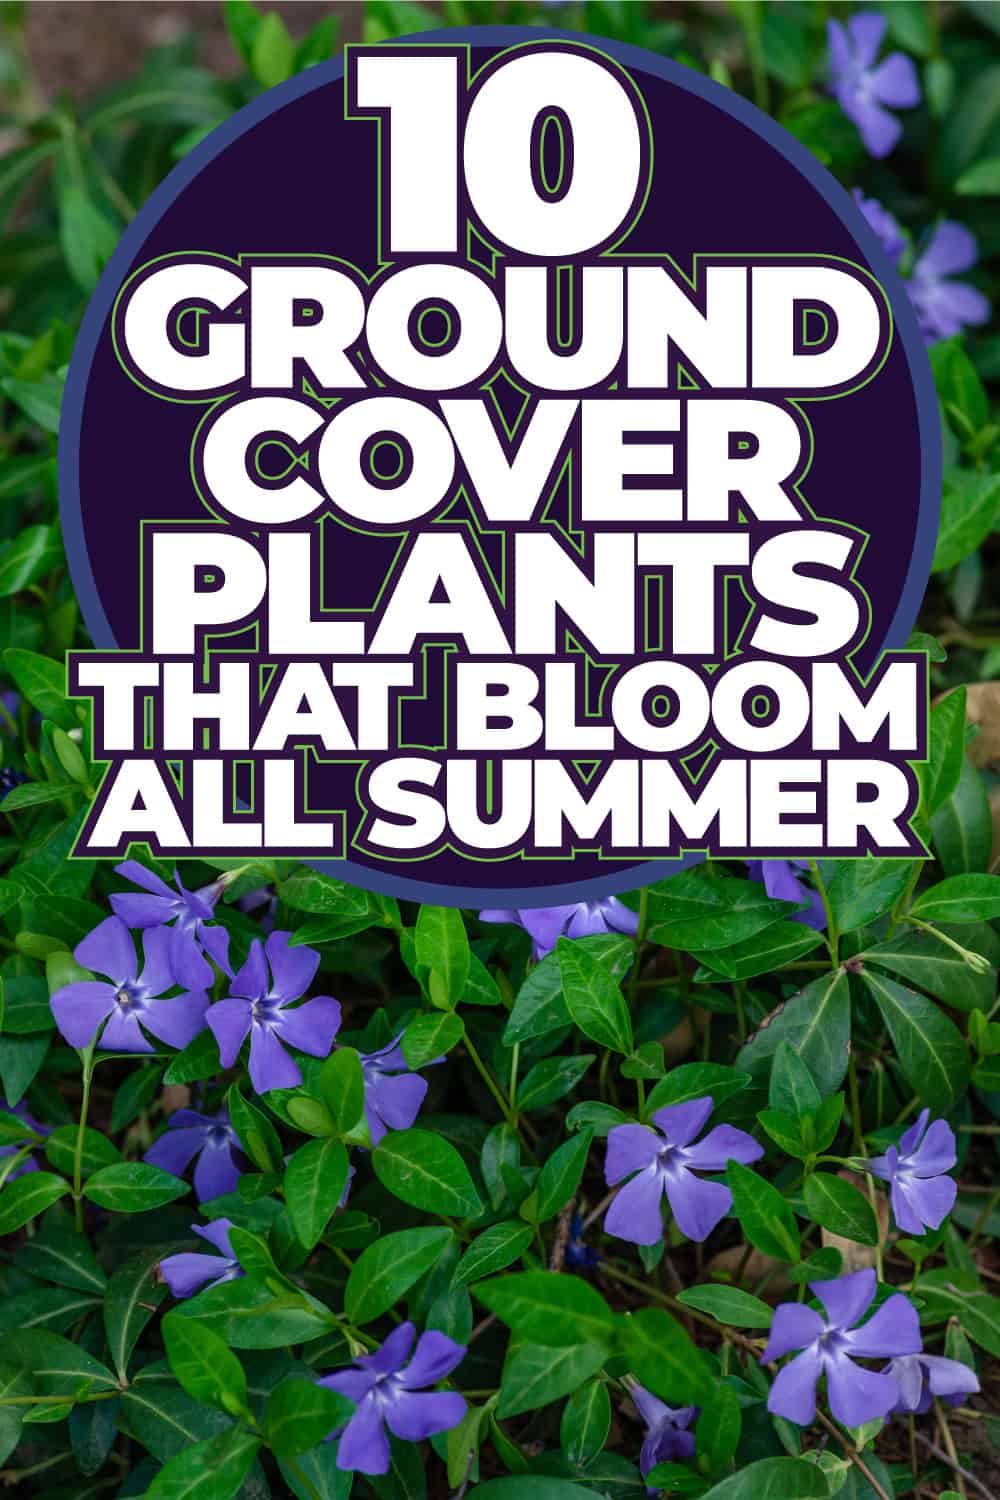 10 Ground Cover Plants That Bloom All Summer - 1600X900